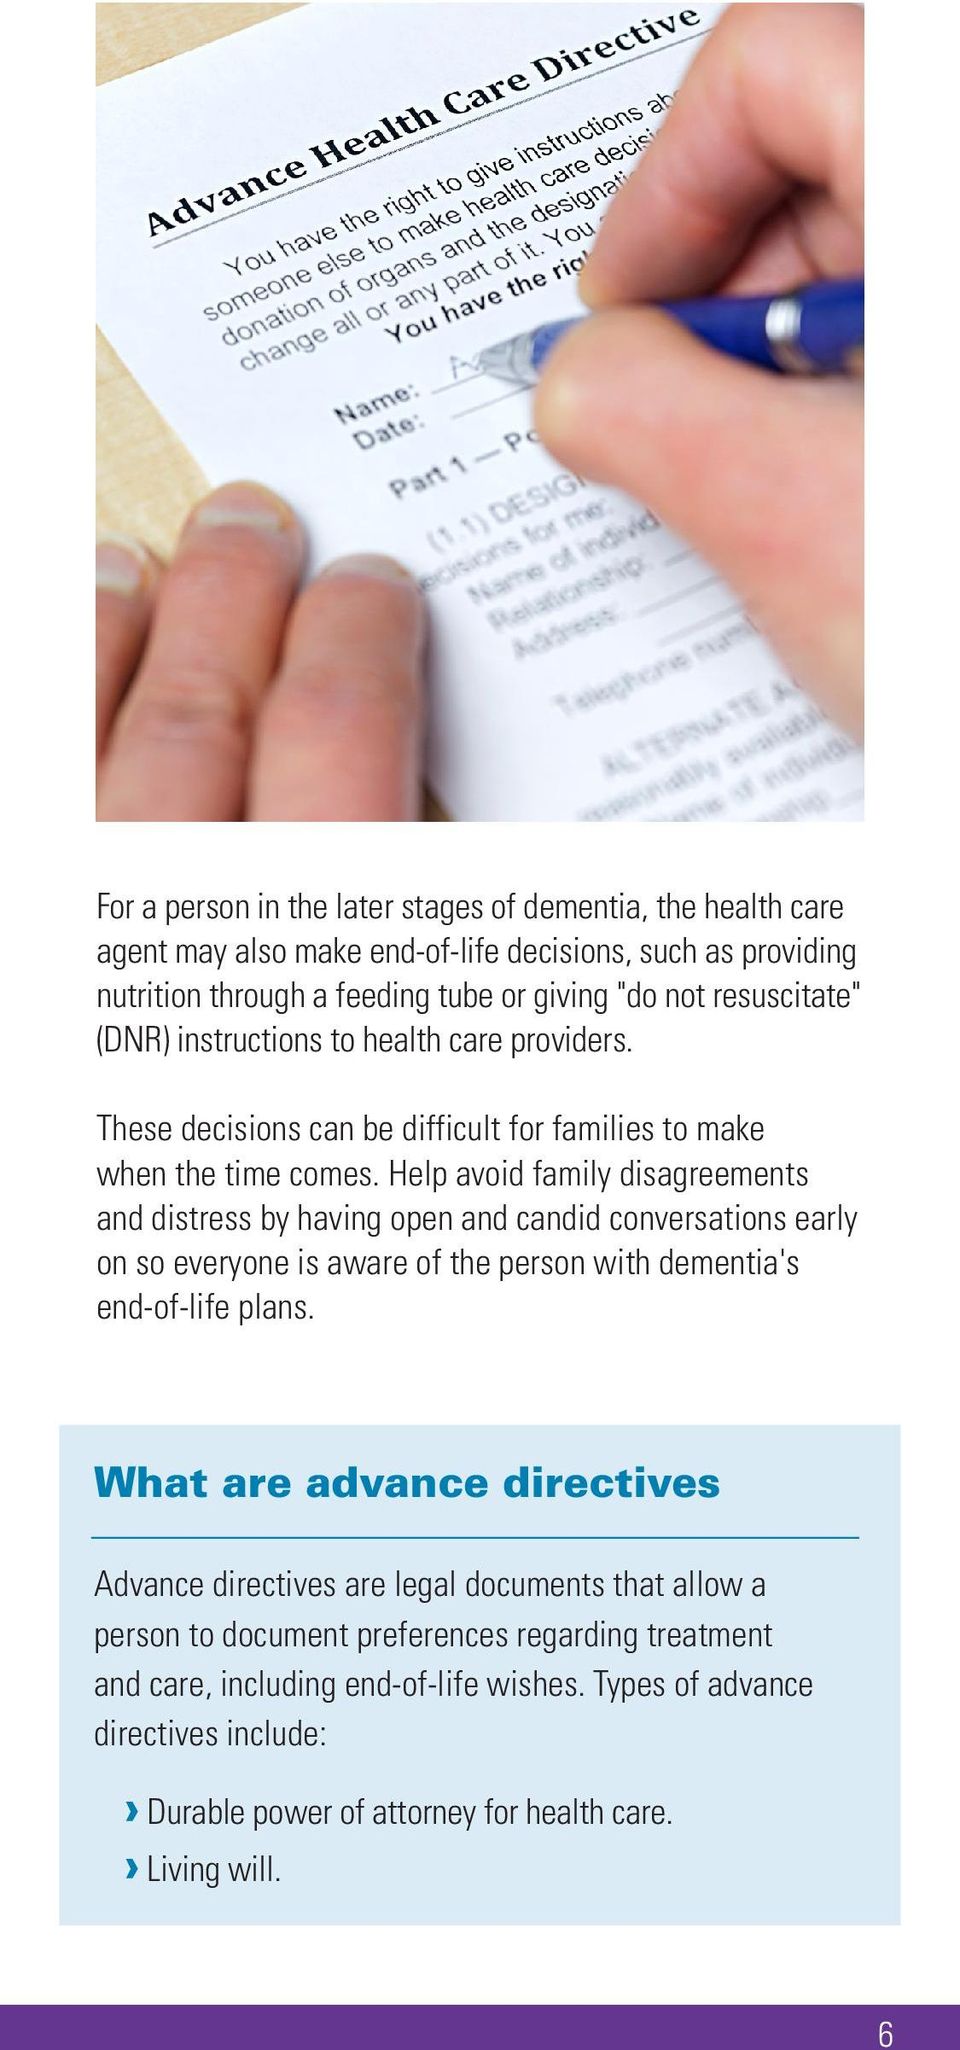 Help avoid family disagreements and distress by having open and candid conversations early on so everyone is aware of the person with dementia's end-of-life plans.